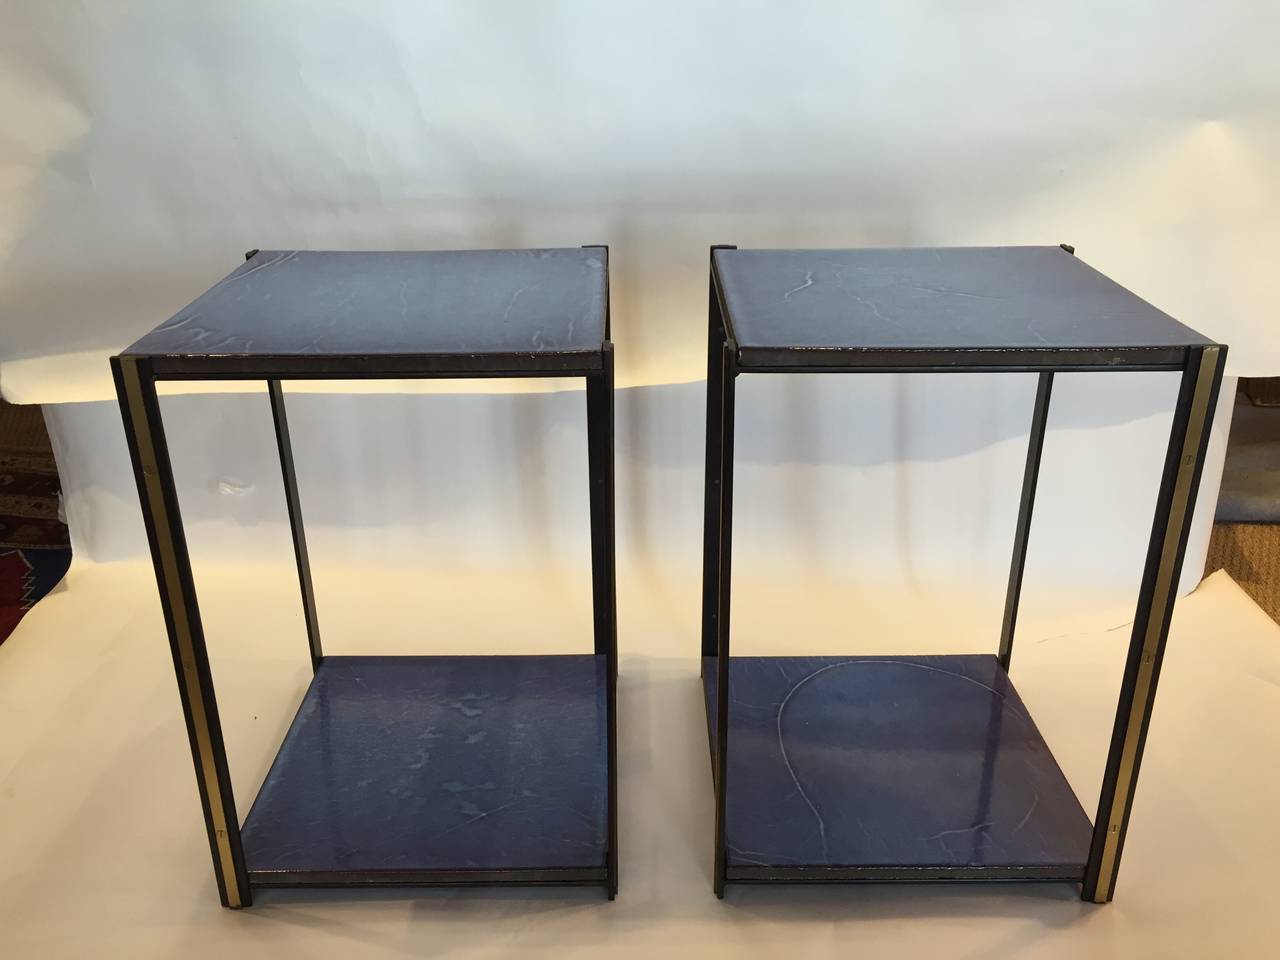 Yves Klein blue vibrant handmade square plateaus on two-tiers. Custom details include brass trim.